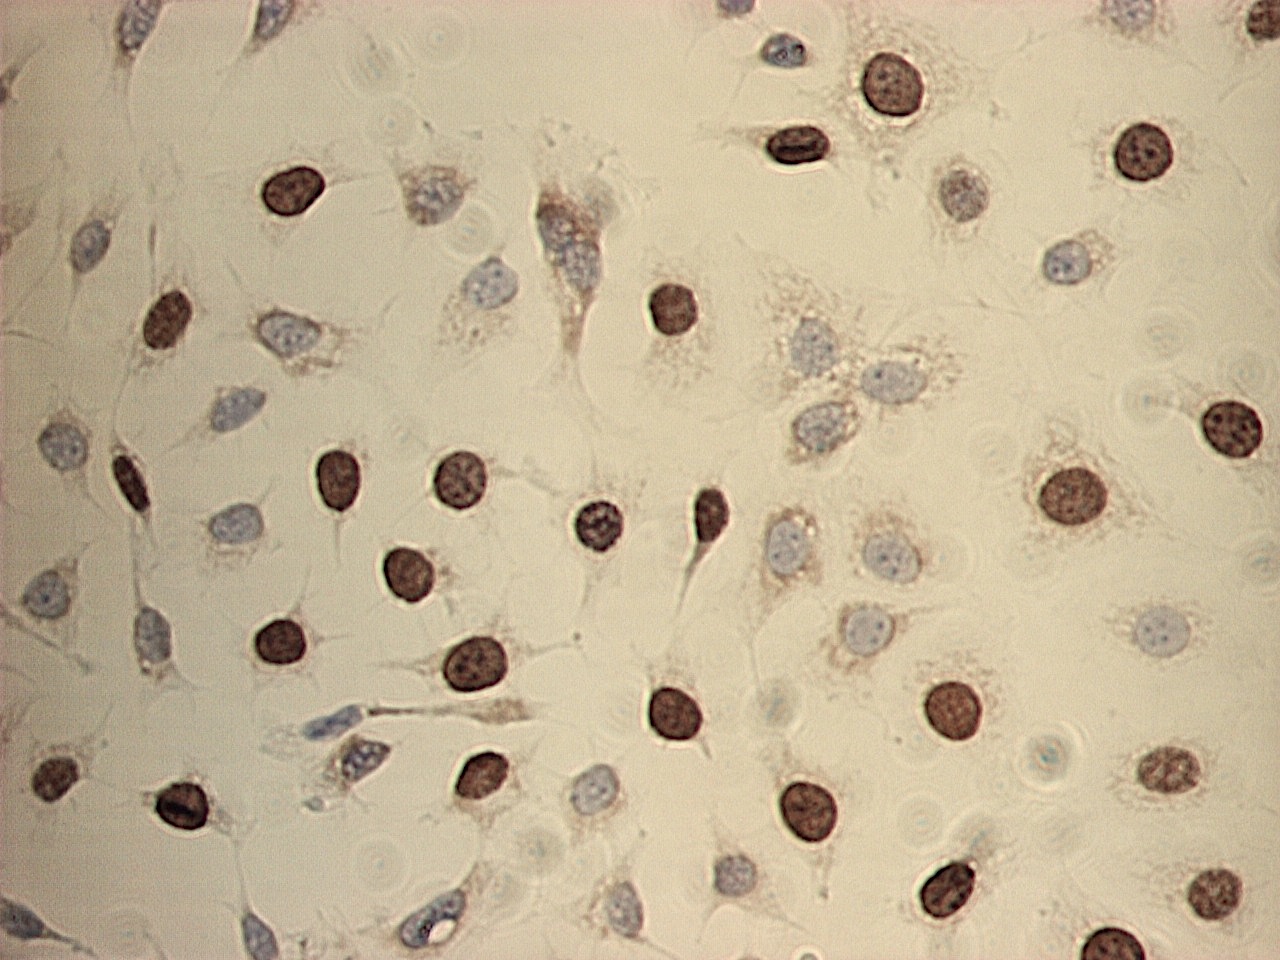 Figure 1: BrdU labeled MCF-7 cells immunostained using the X1545K.1 kit. Note the specific nuclear staining of proliferating S-phase cells.